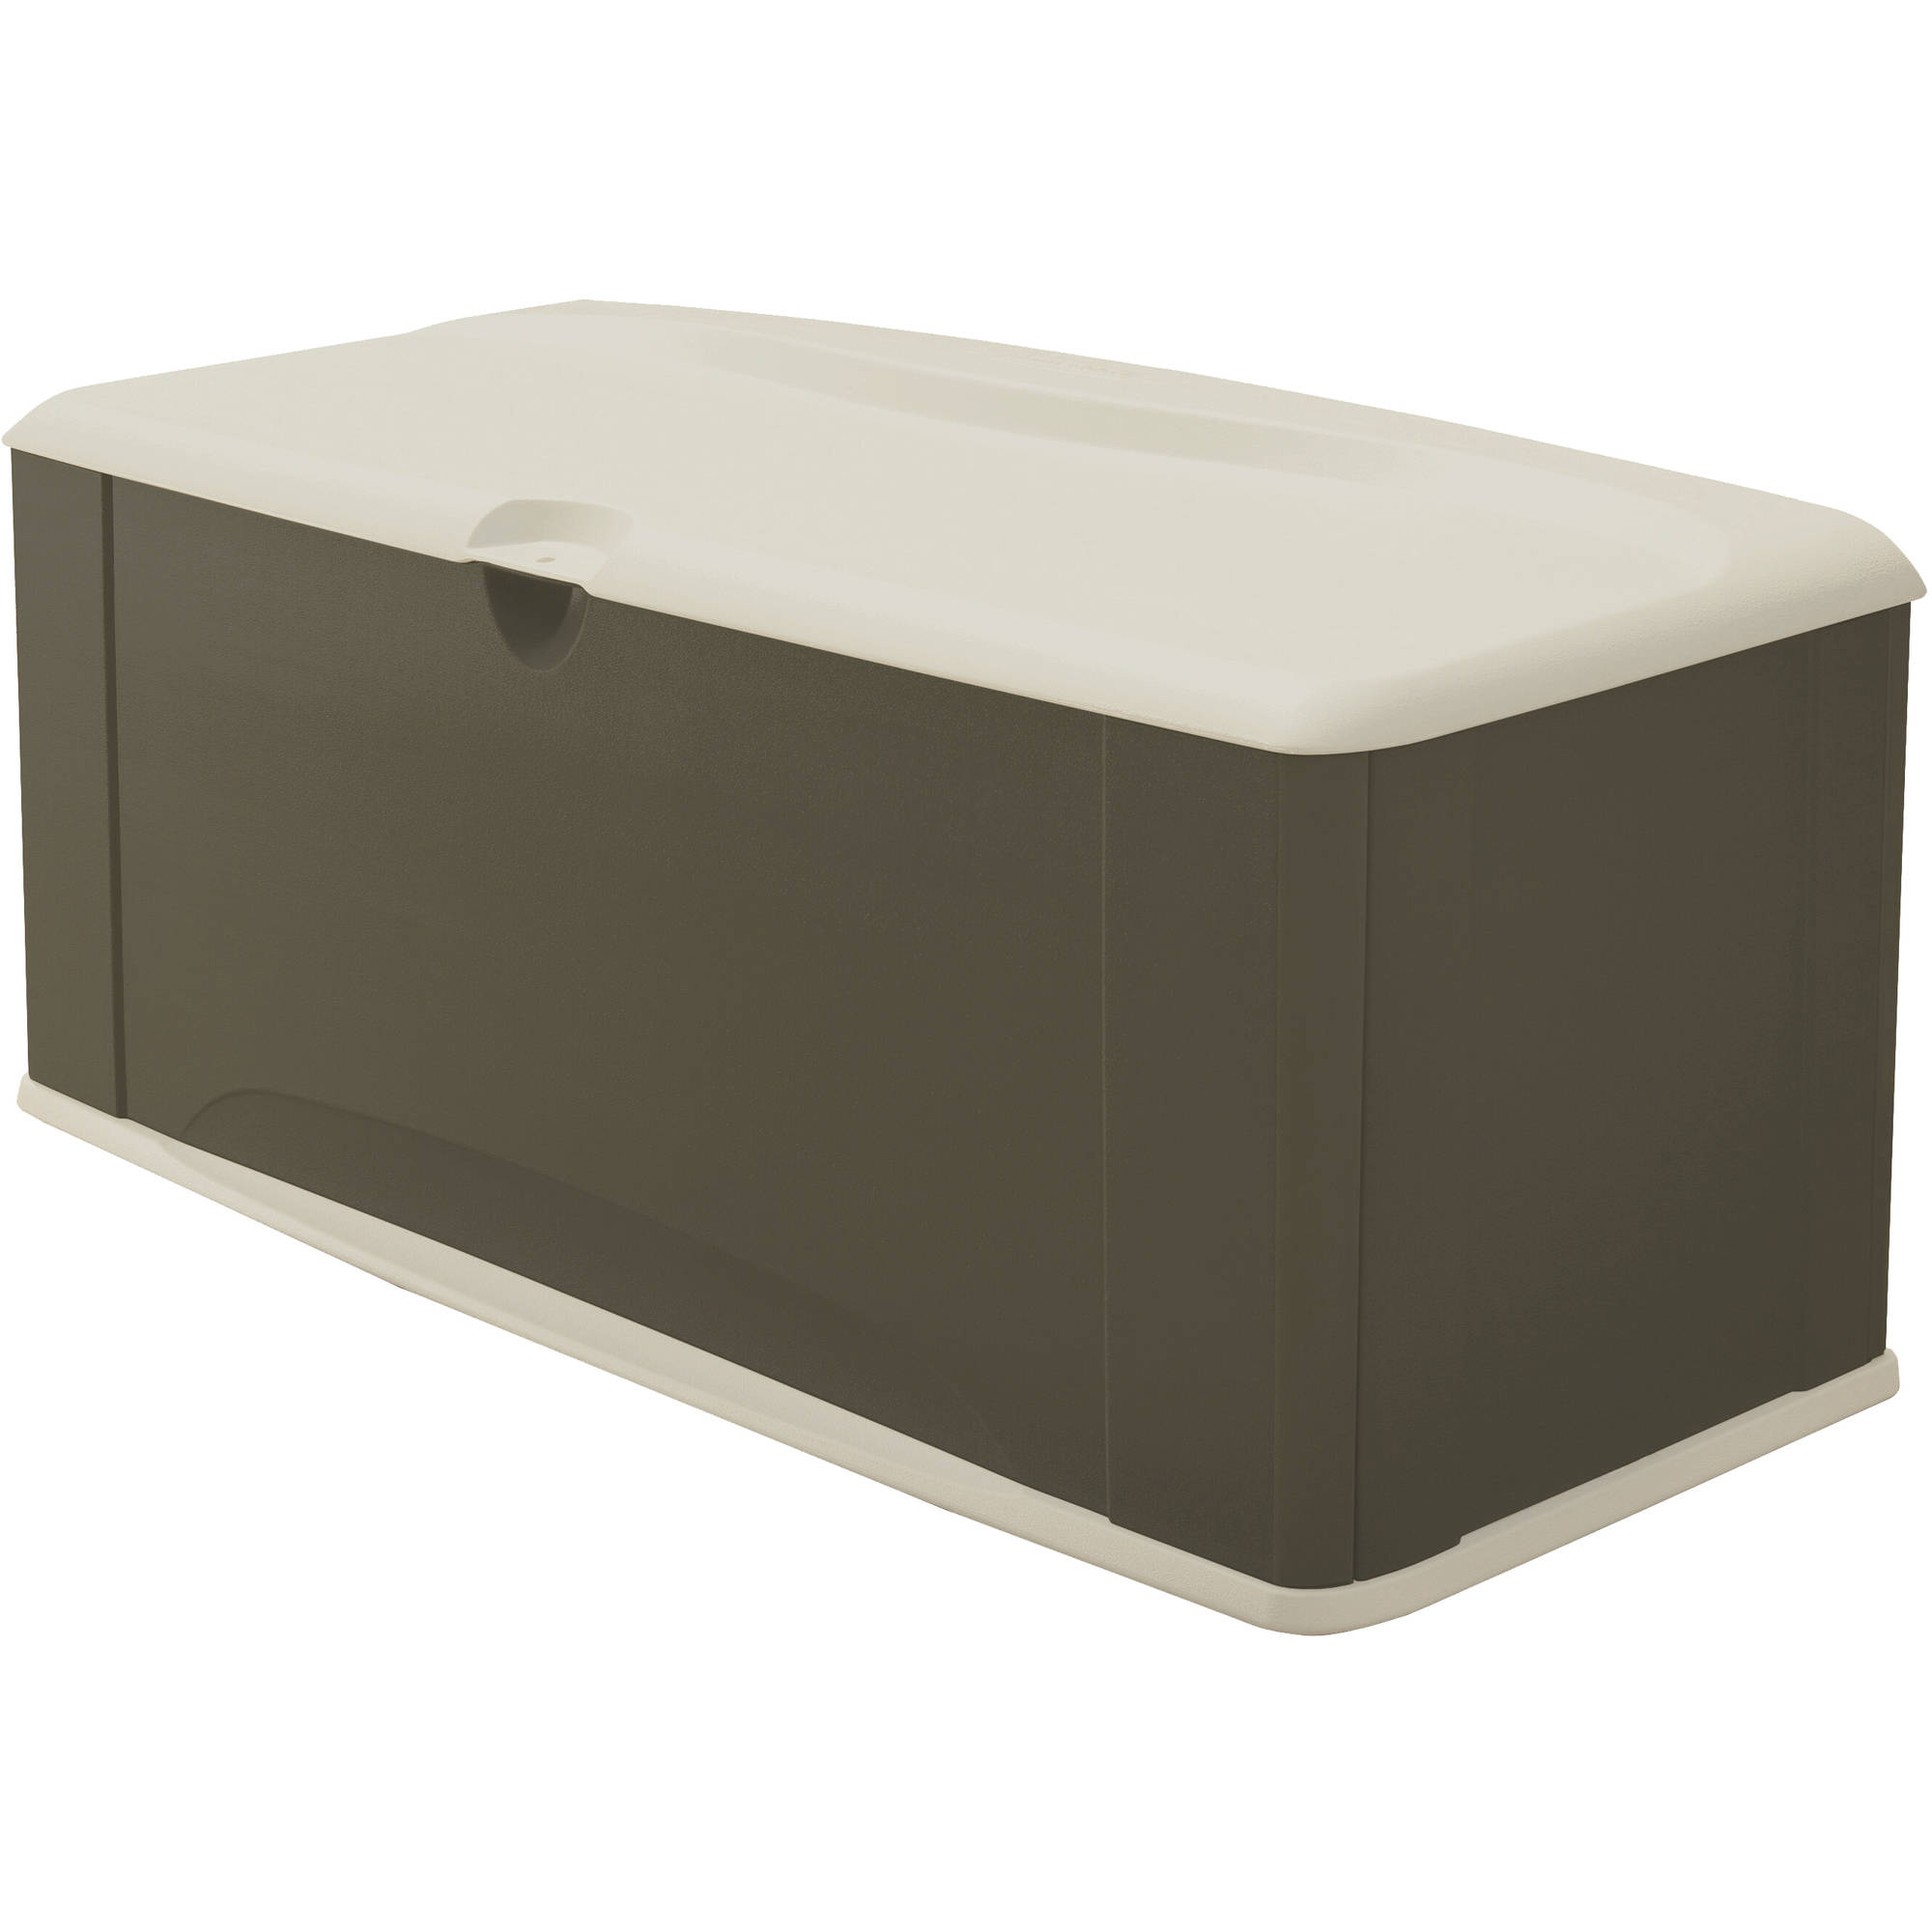 Rubbermaid Outdoor Extra-Large Deck Box with Seat, Gray & Brown, 121 Gallon - image 1 of 5